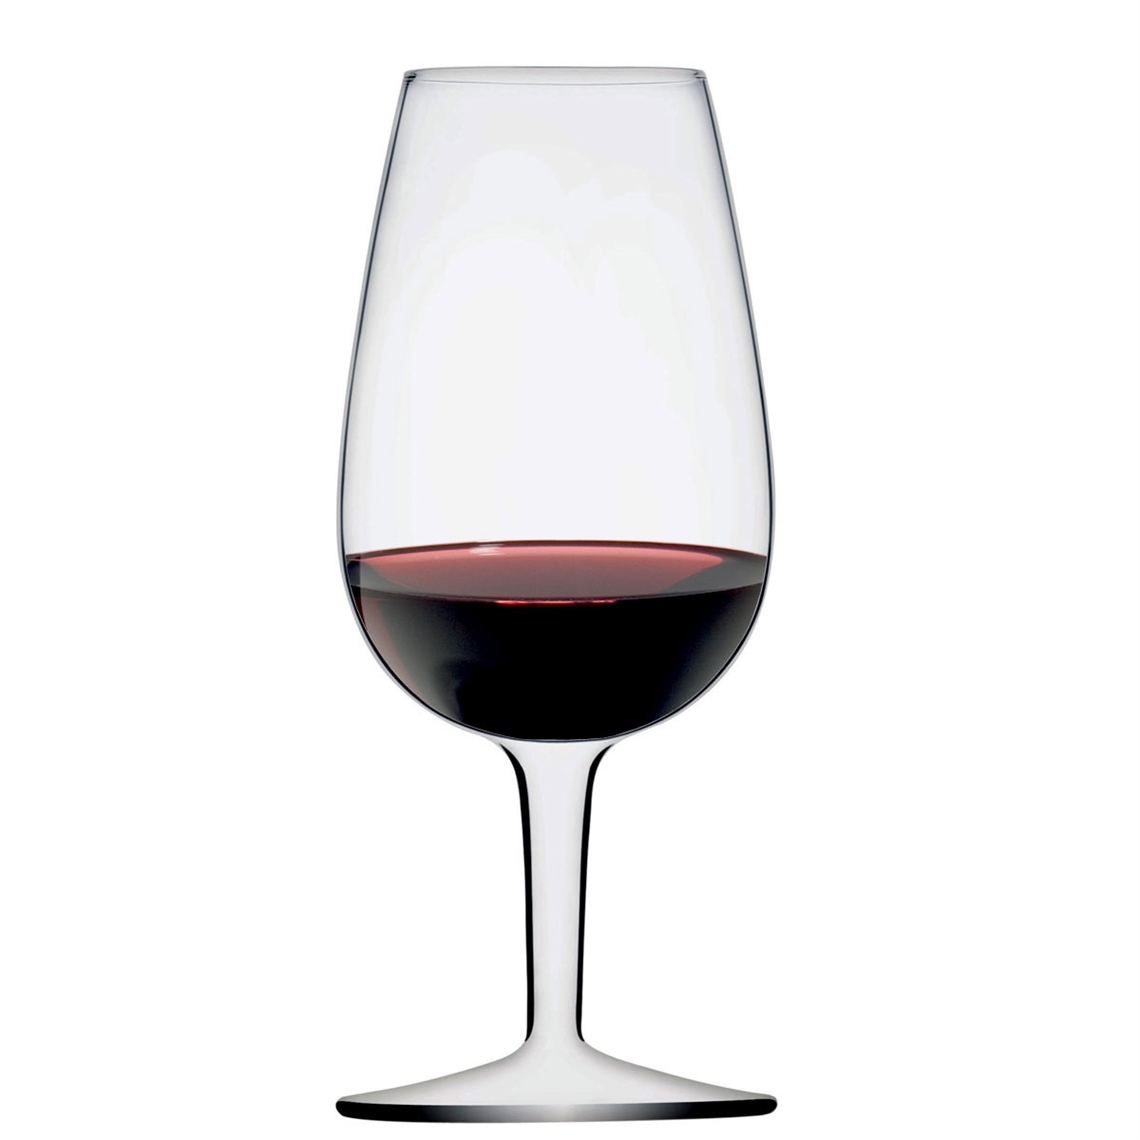 View more the best vineyards in sussex! from our Wine Tasting Glasses range